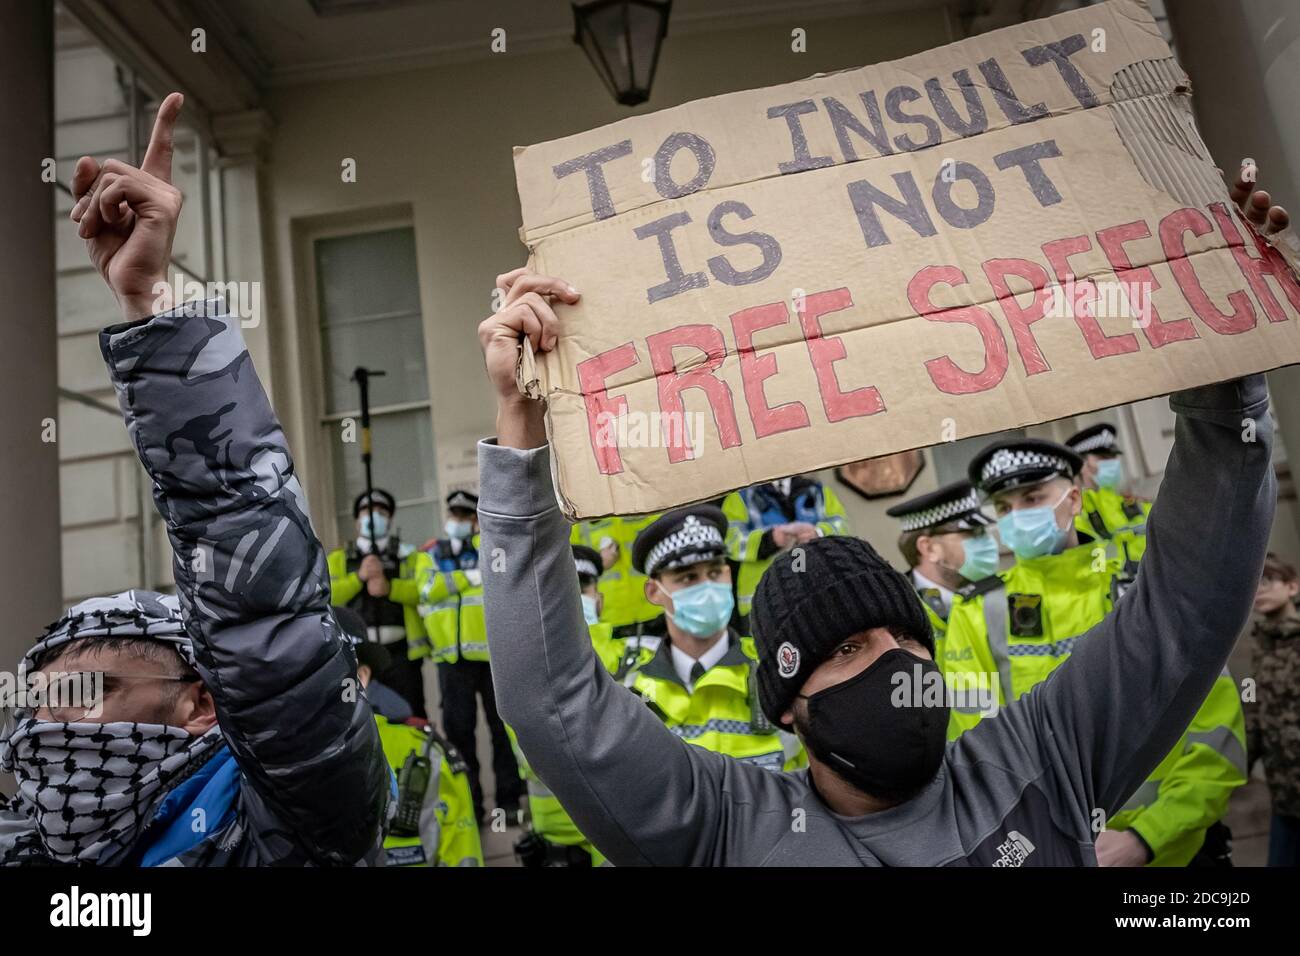 Hundreds of British Muslims protest outside the French Embassy in London against the satirical anti-muslim cartoons published by Charlie Hebdo. Stock Photo